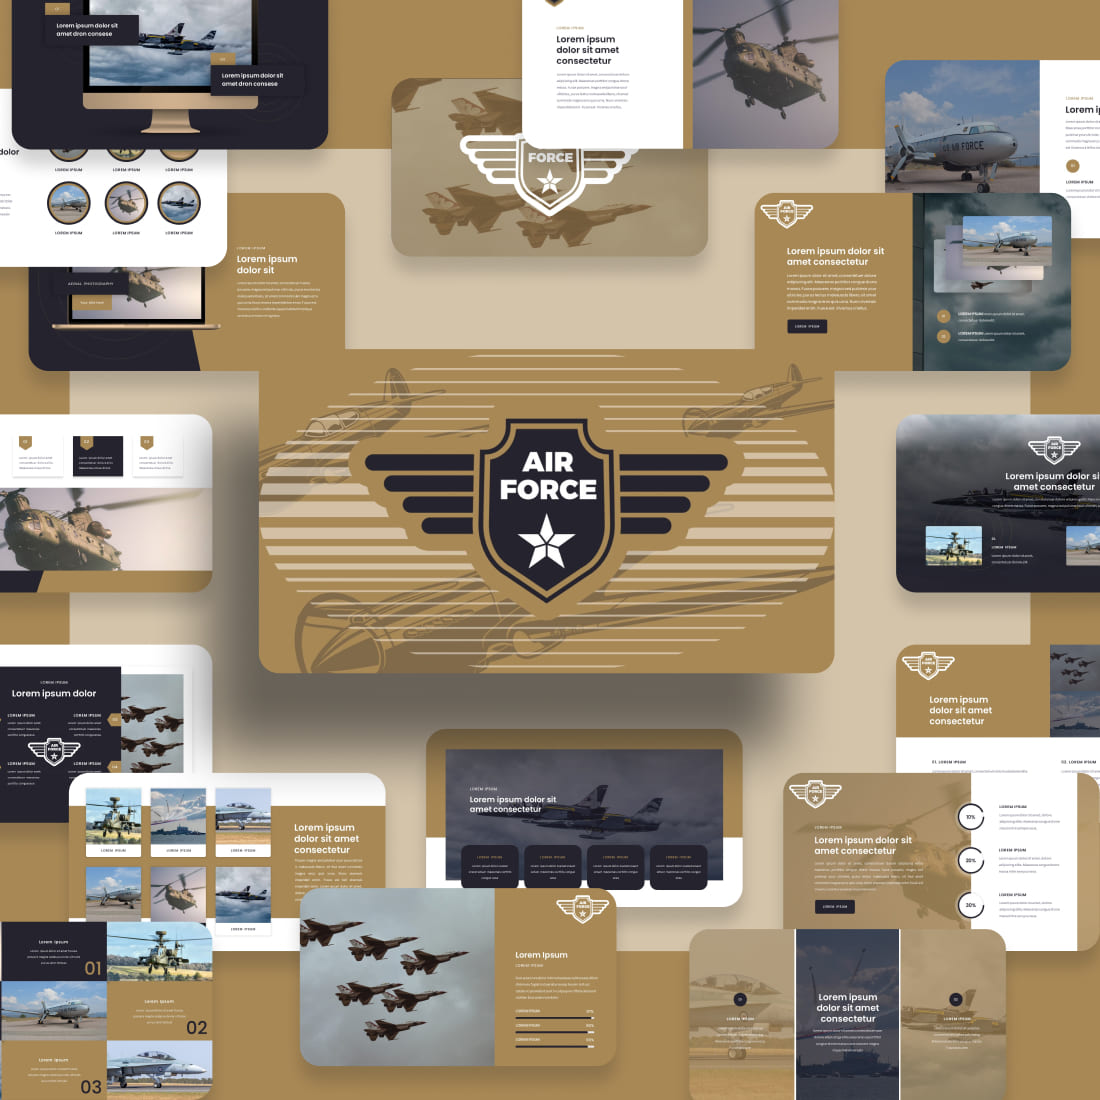 Airforce googleslides template cover image.